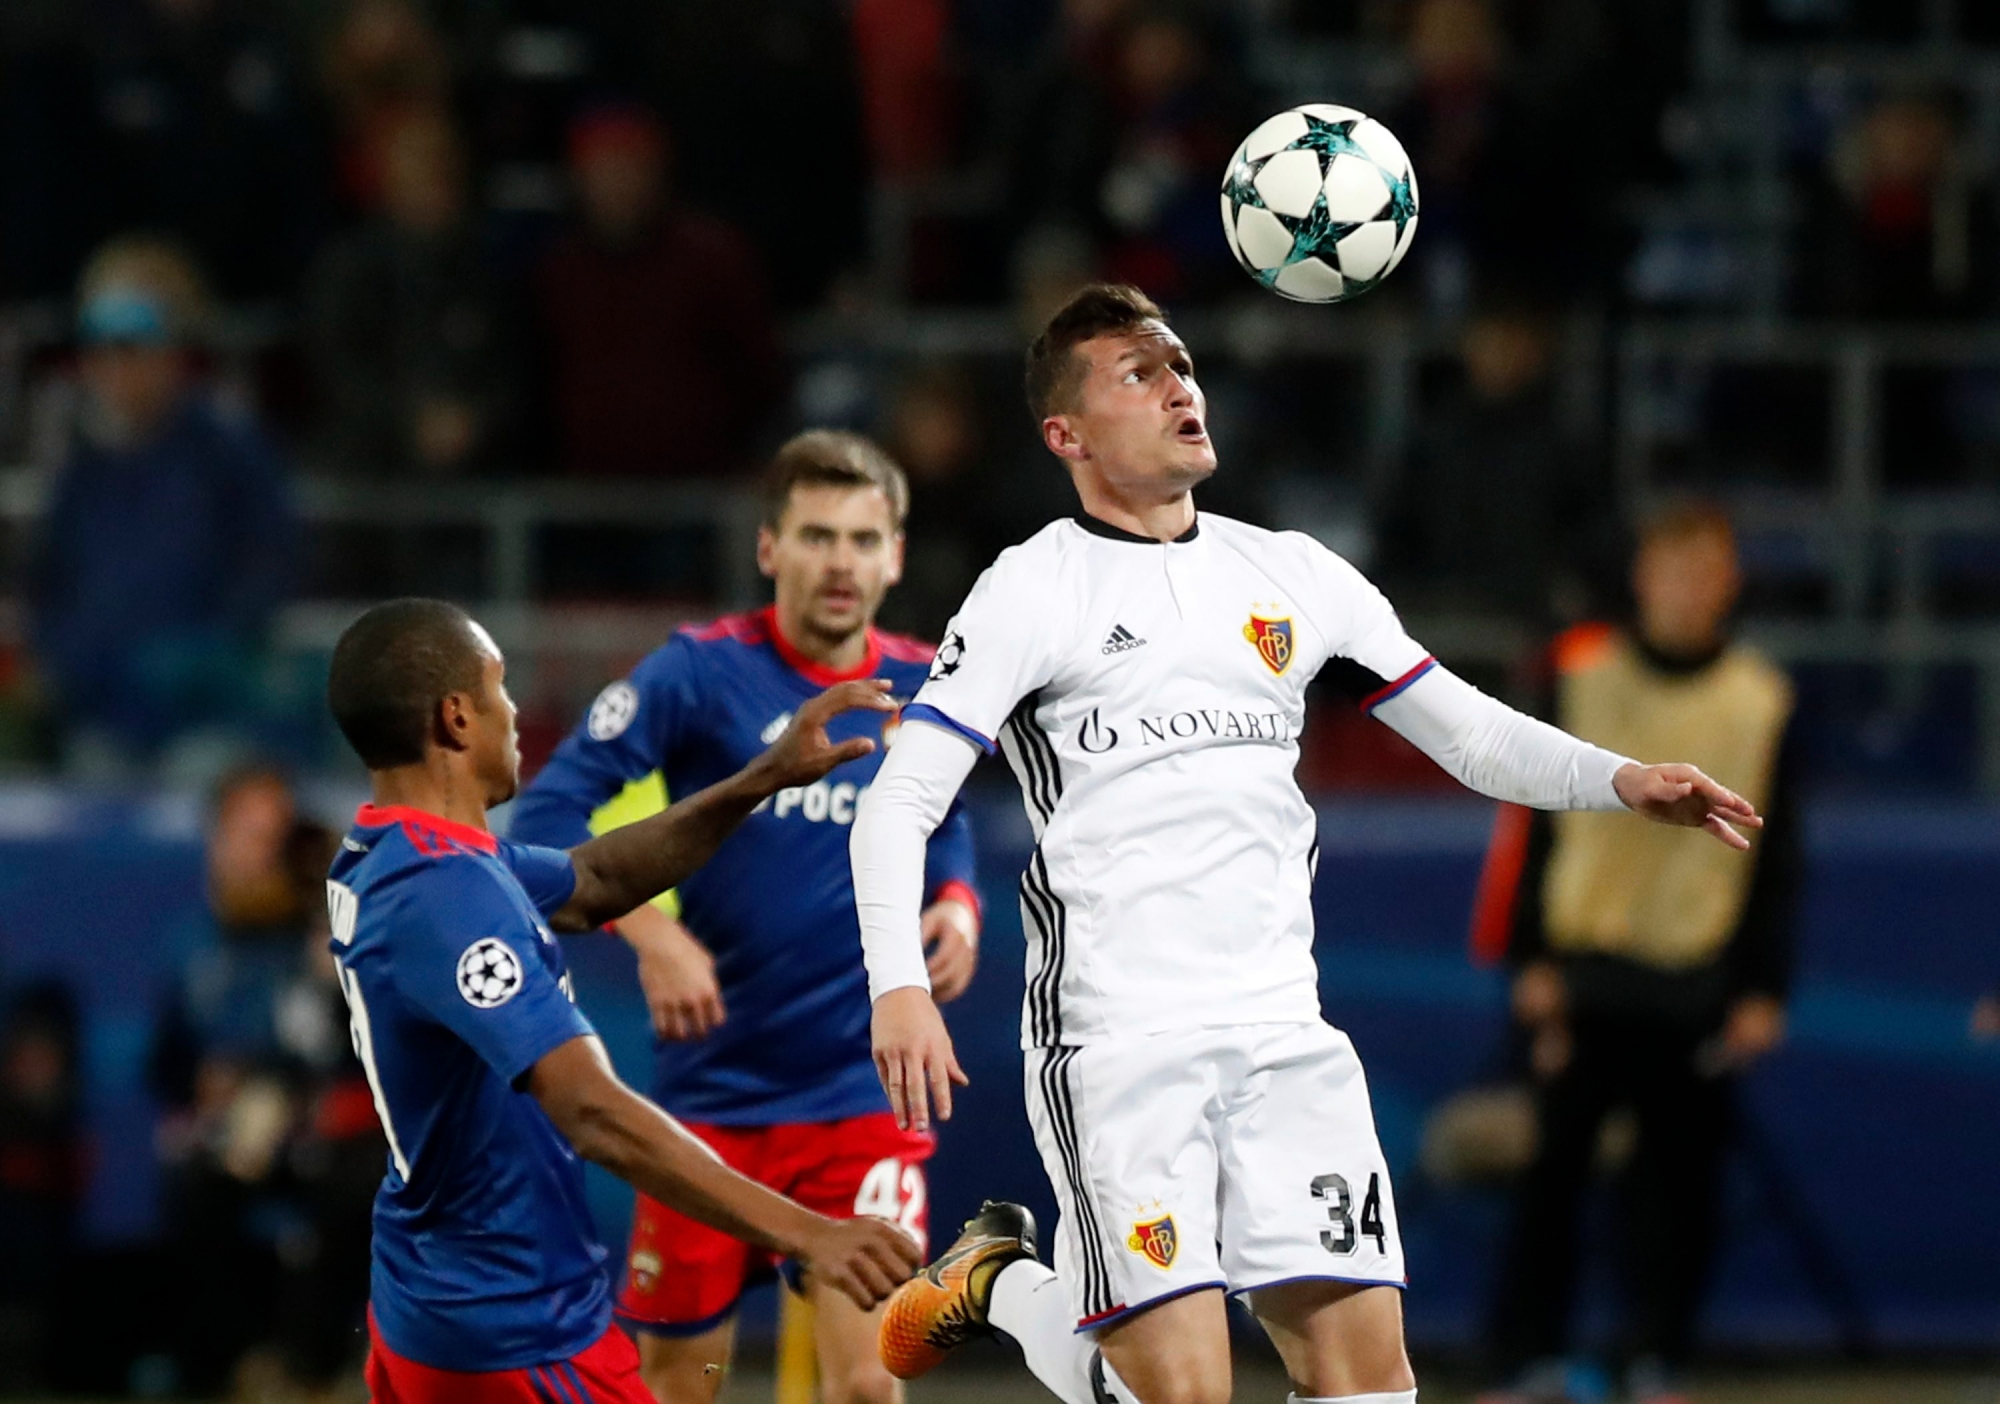 Basel's Taulant Xhaka, right, challenges for the ball with CSKA's Vitinho during the Champions League Group A soccer match between CSKA Moscow and Basel in Moscow, Russia, Wednesday, Oct. 18, 2017. (AP Photo/Pavel Golovkin) Russia Soccer Champions League